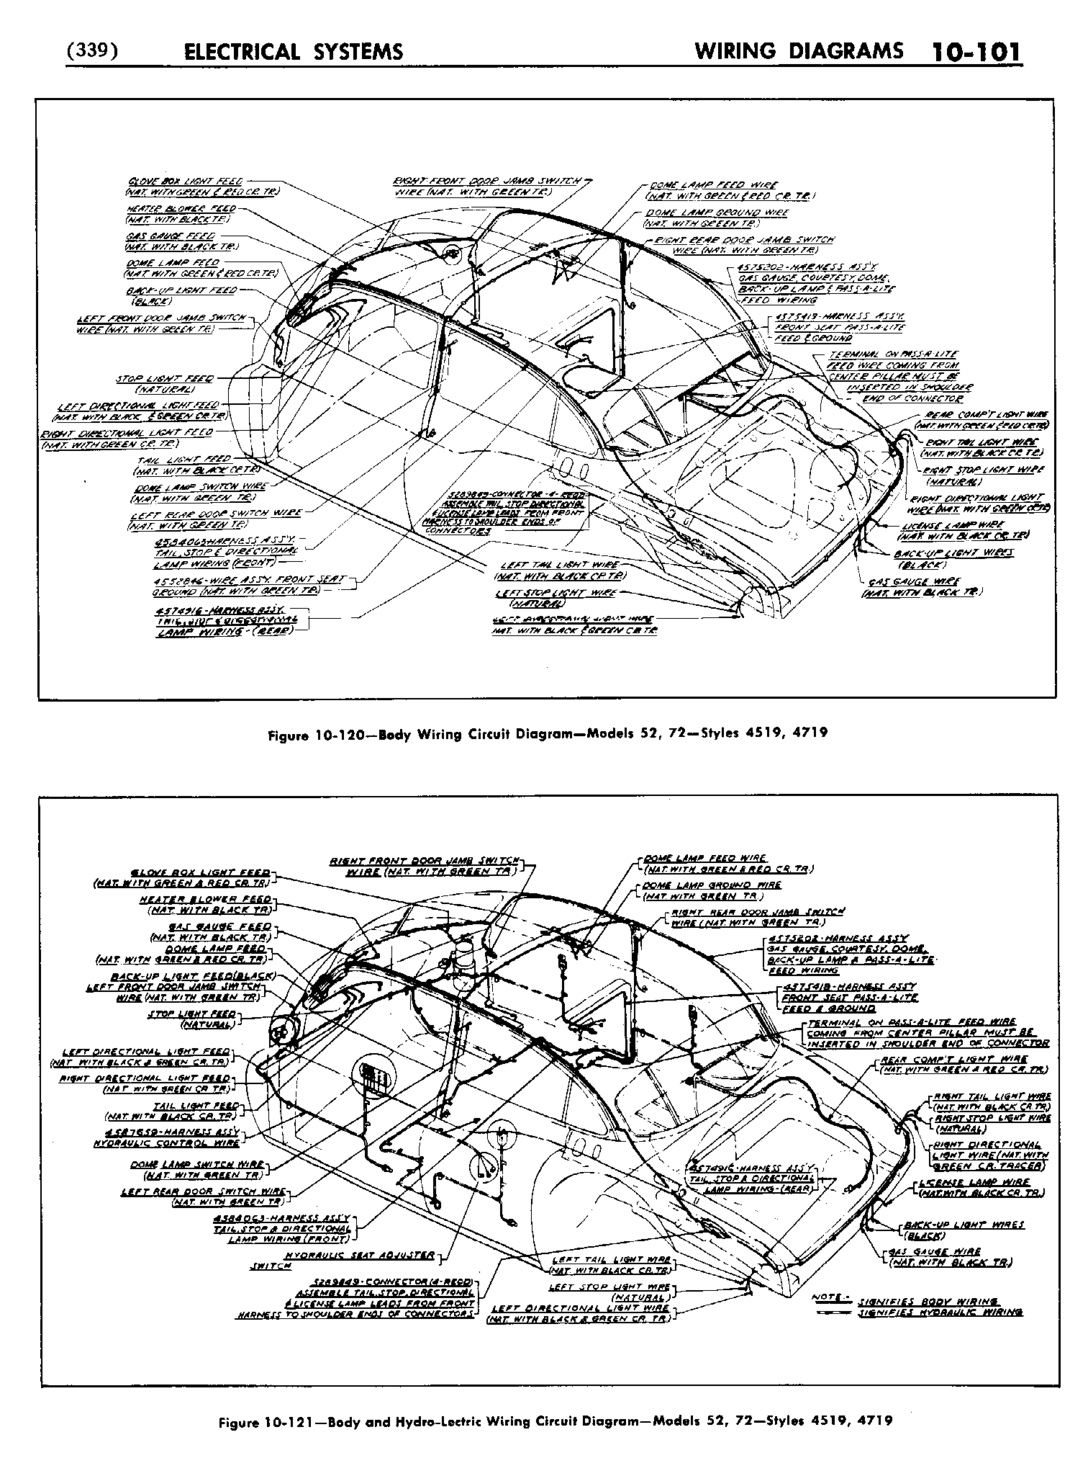 n_11 1950 Buick Shop Manual - Electrical Systems-101-101.jpg